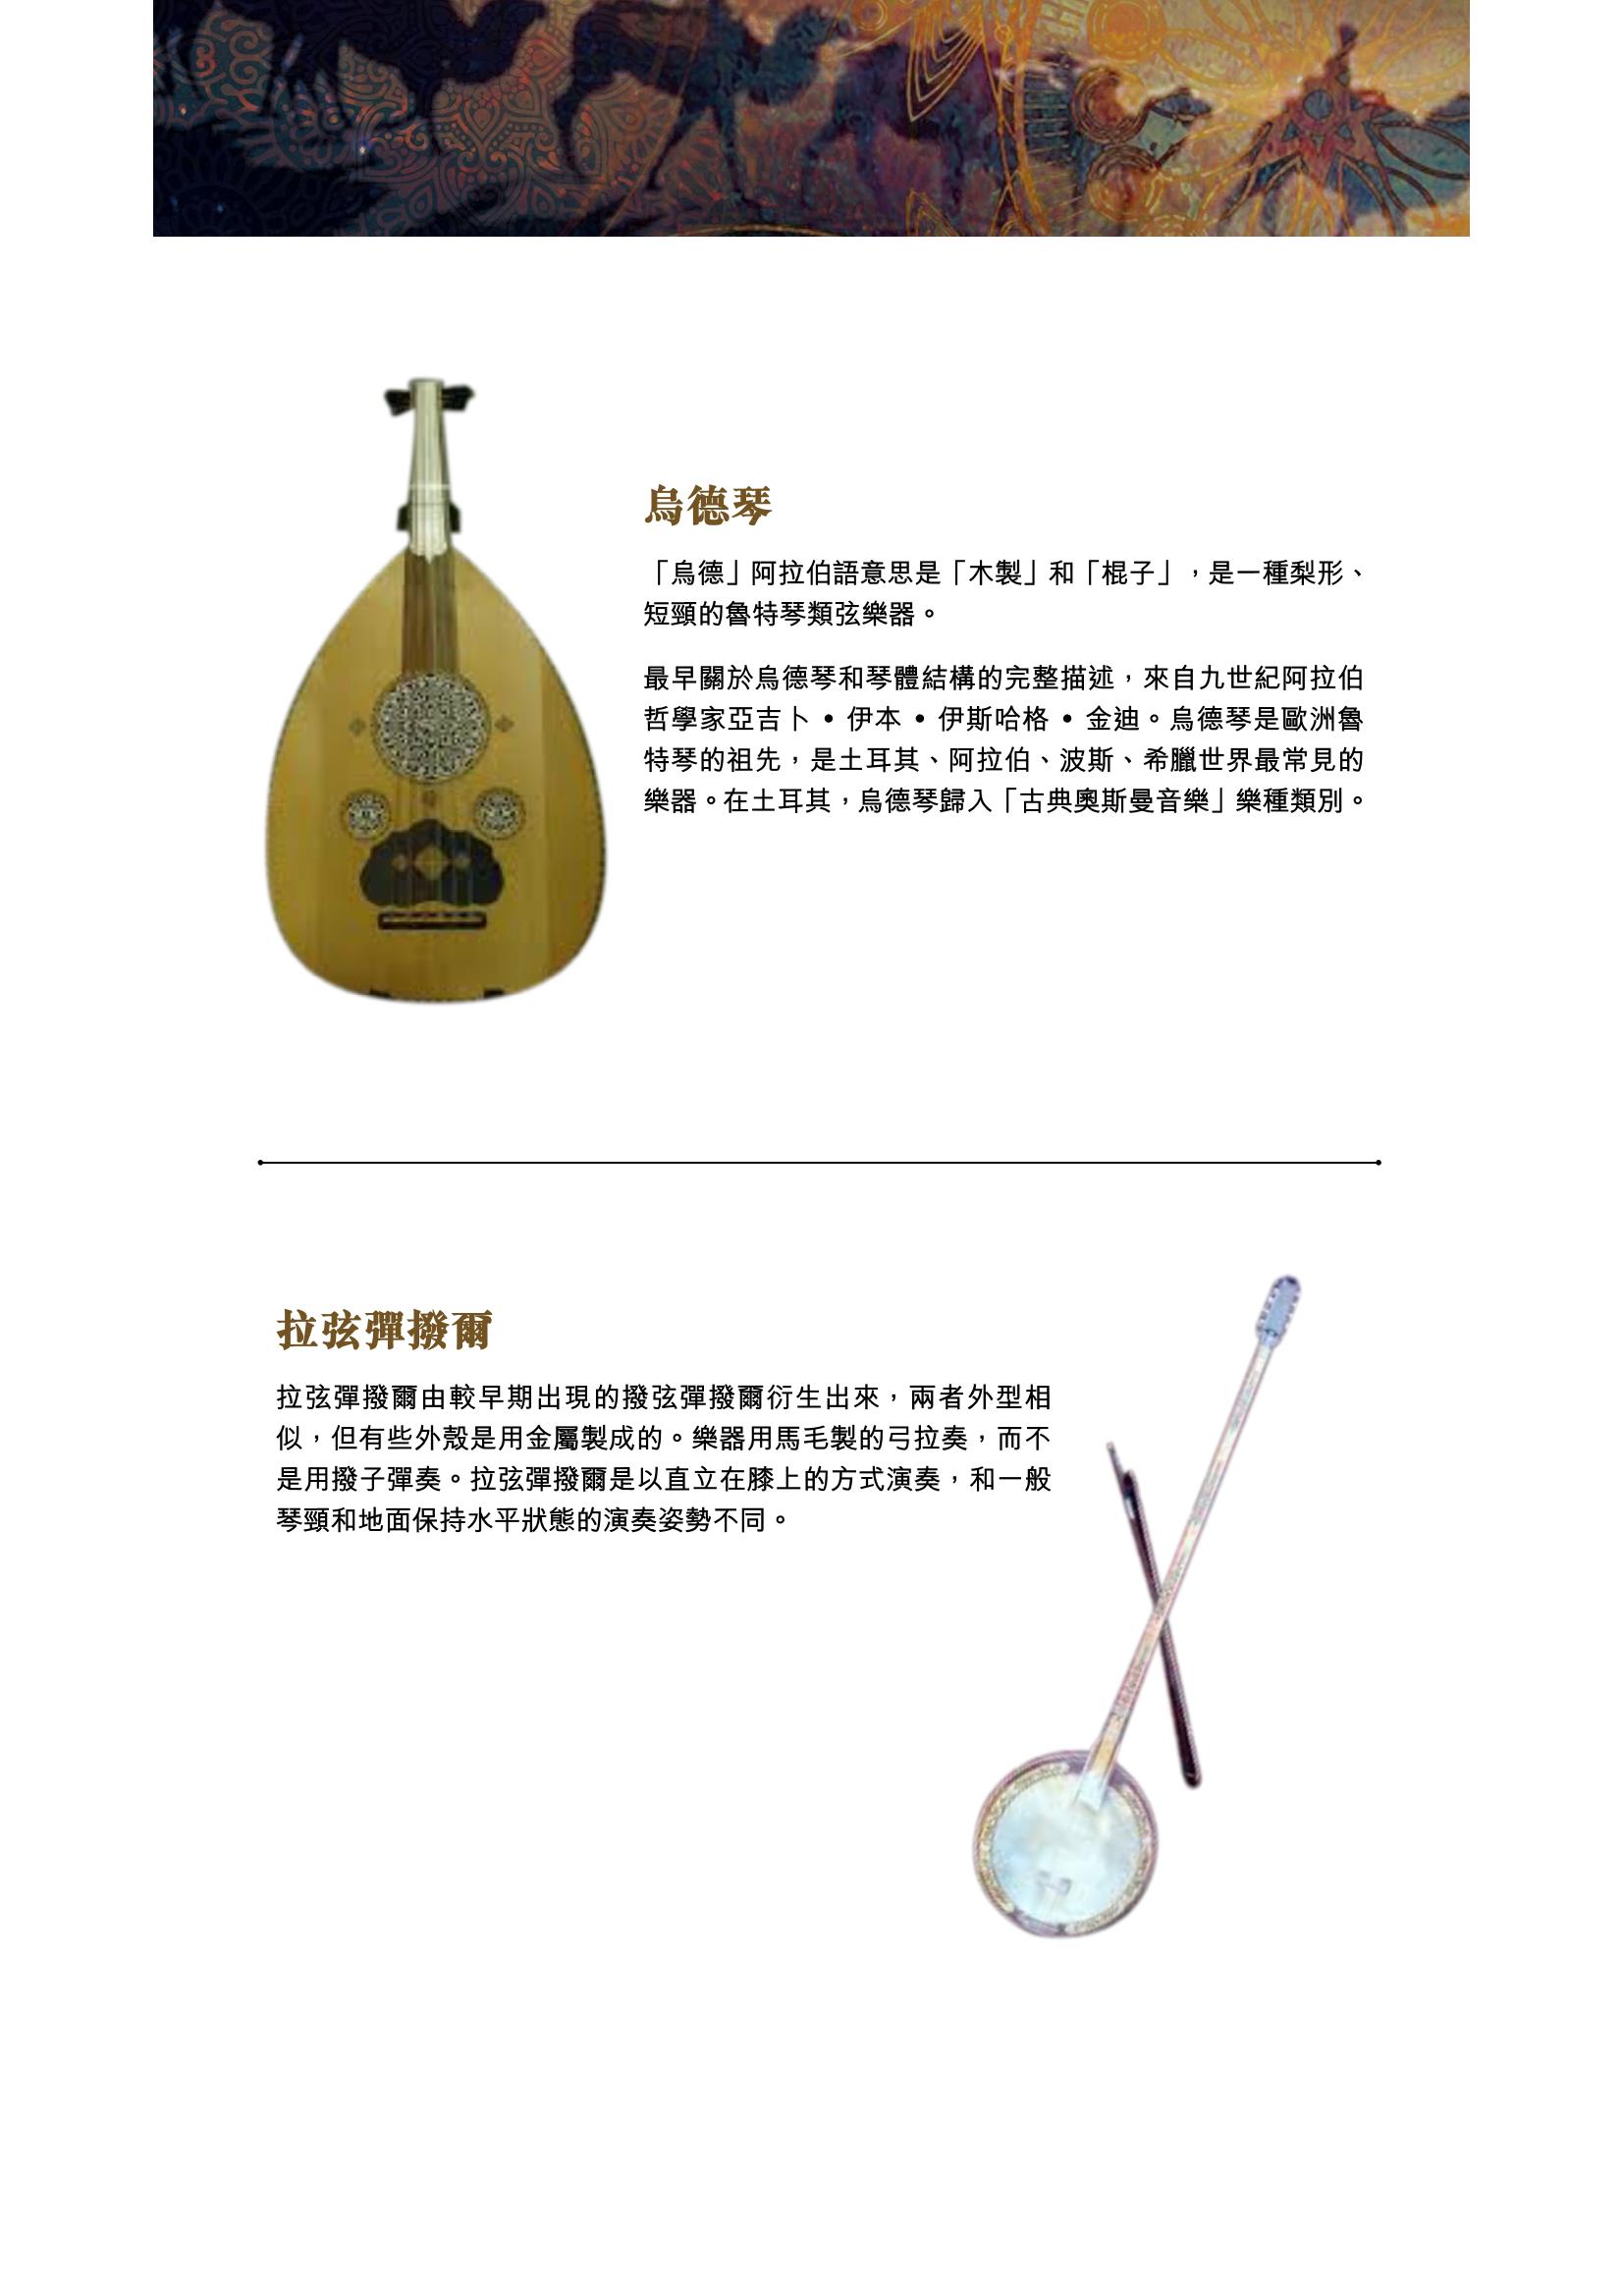 Chinese Instruments Introduction